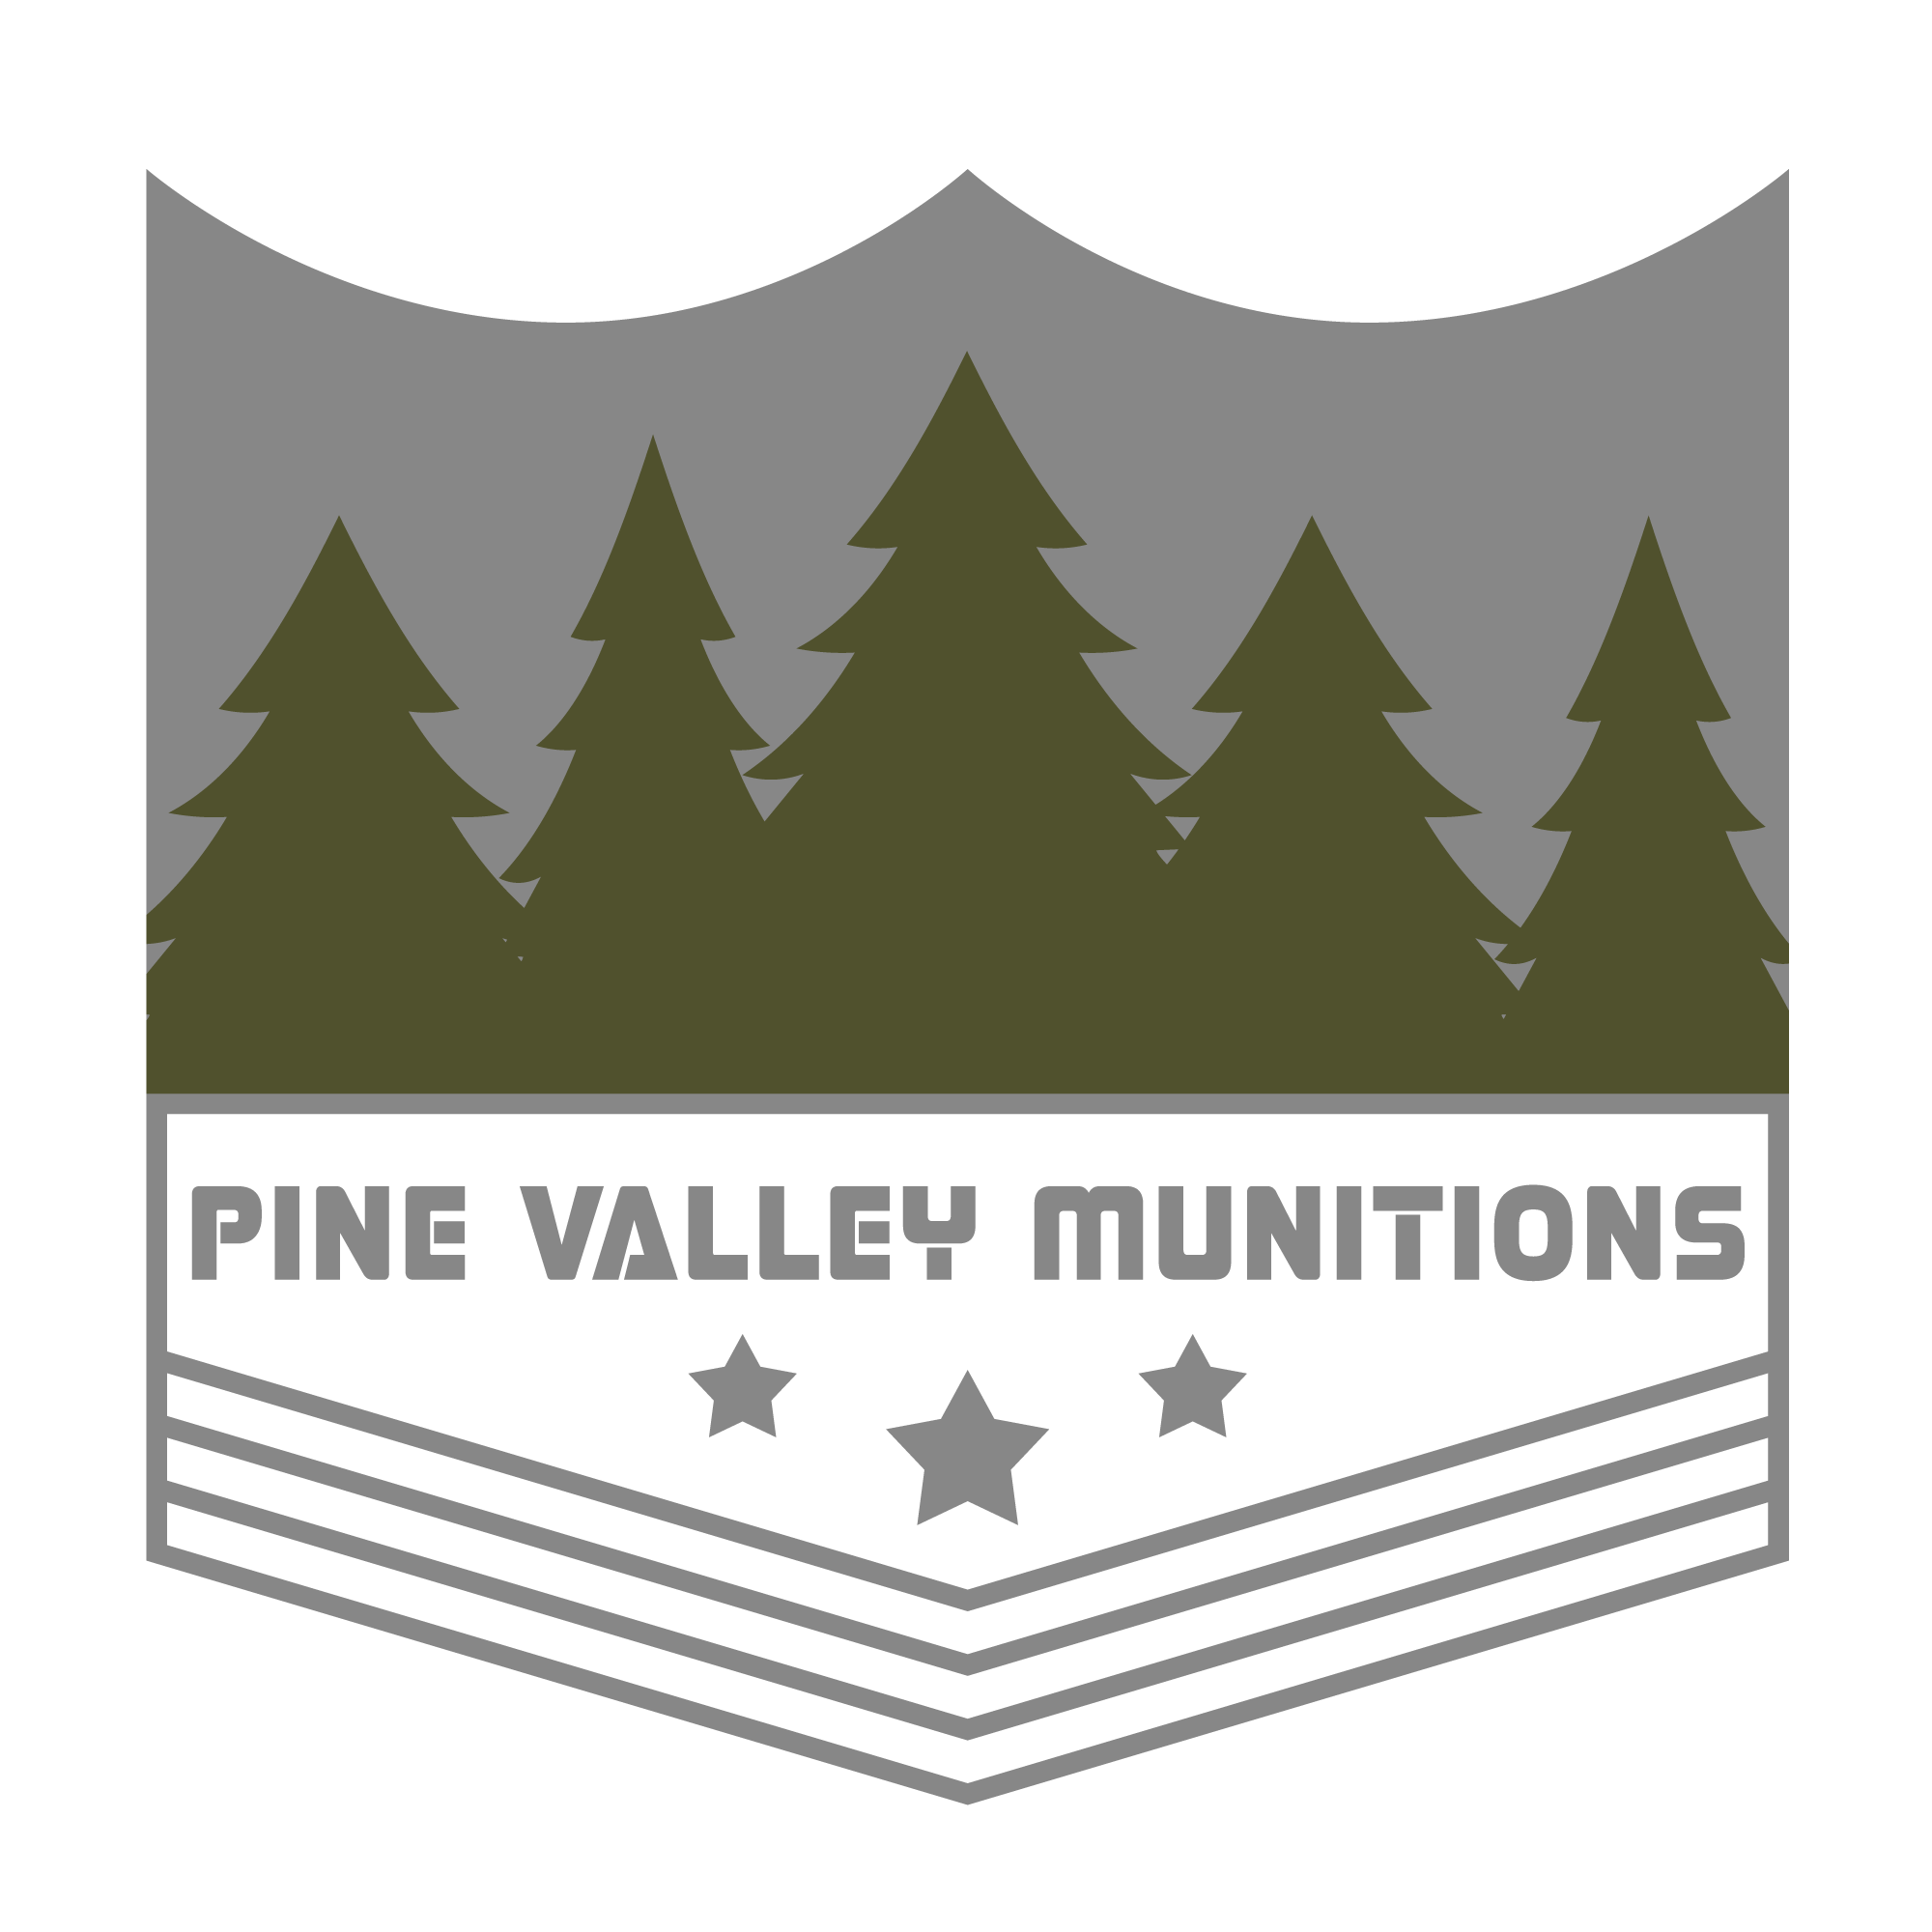 Pine Valley Munitions